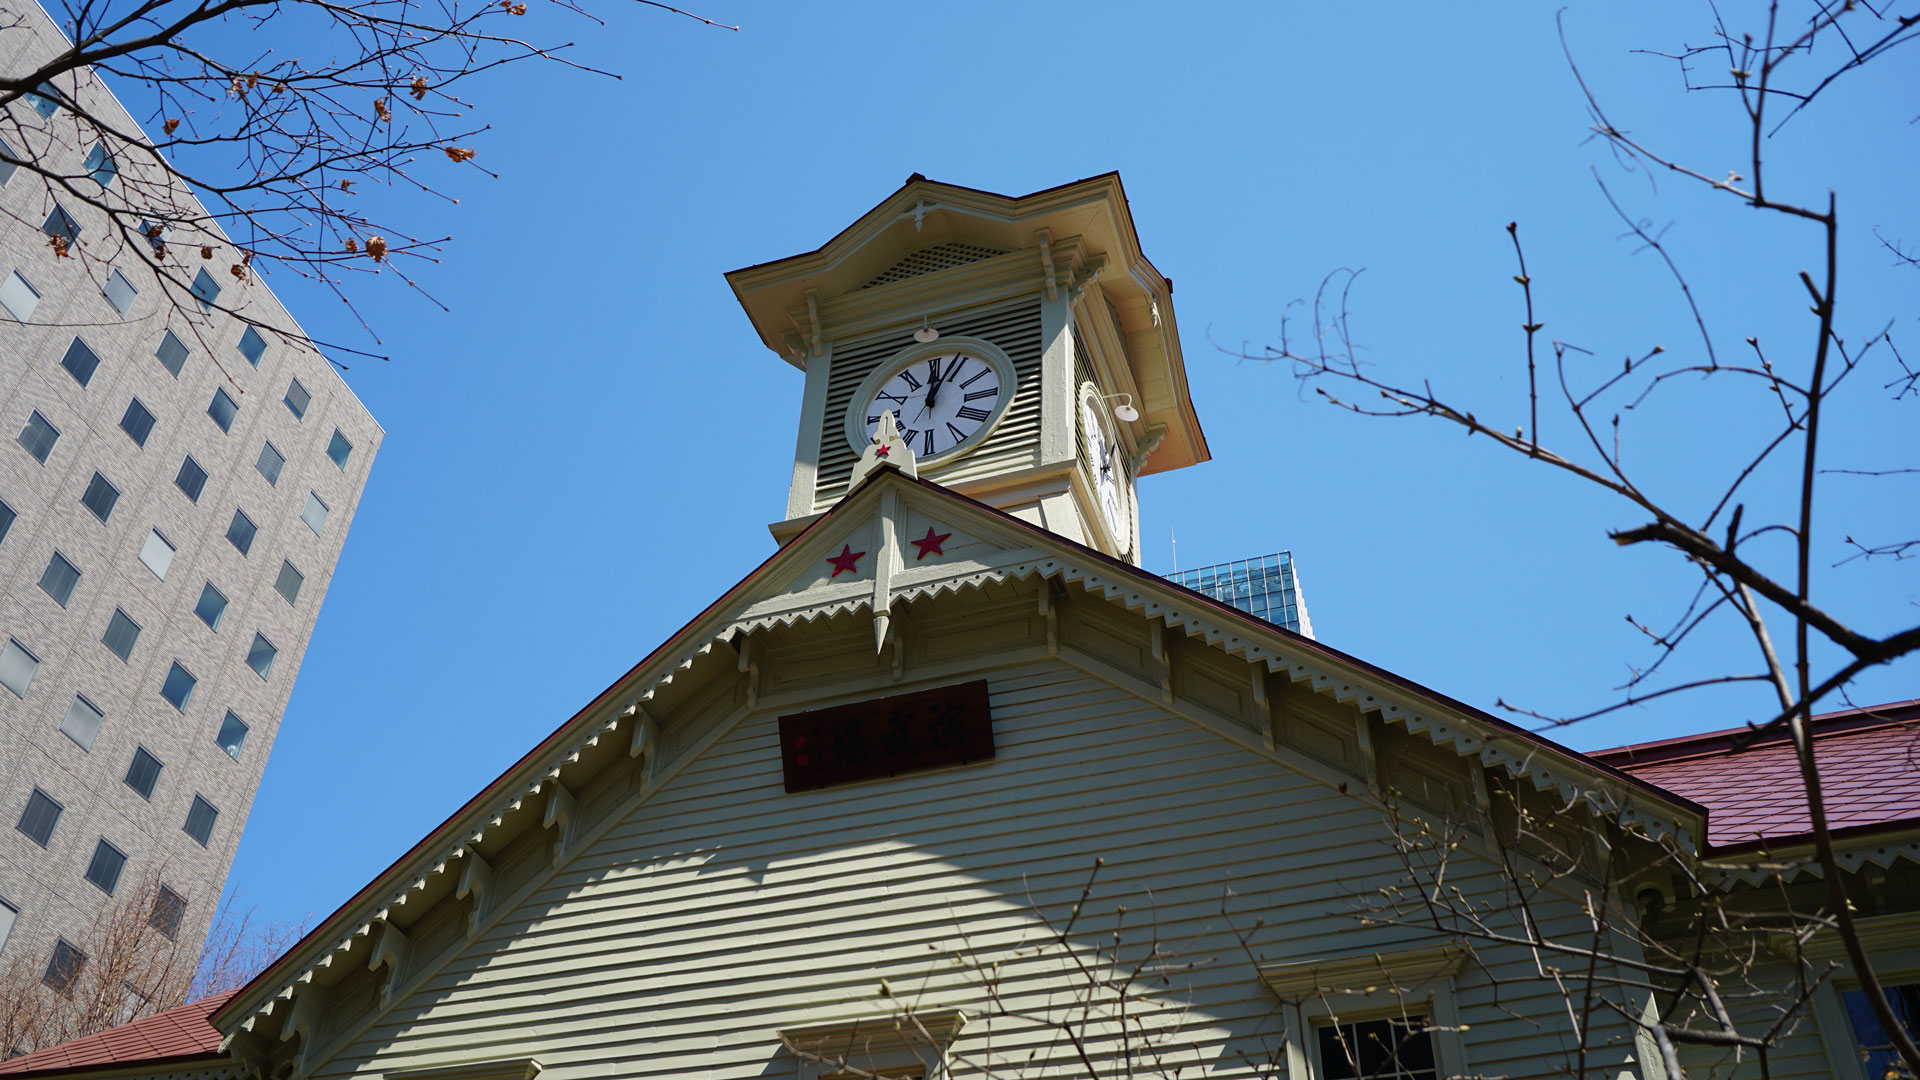 Sapporo Clock Tower Bell